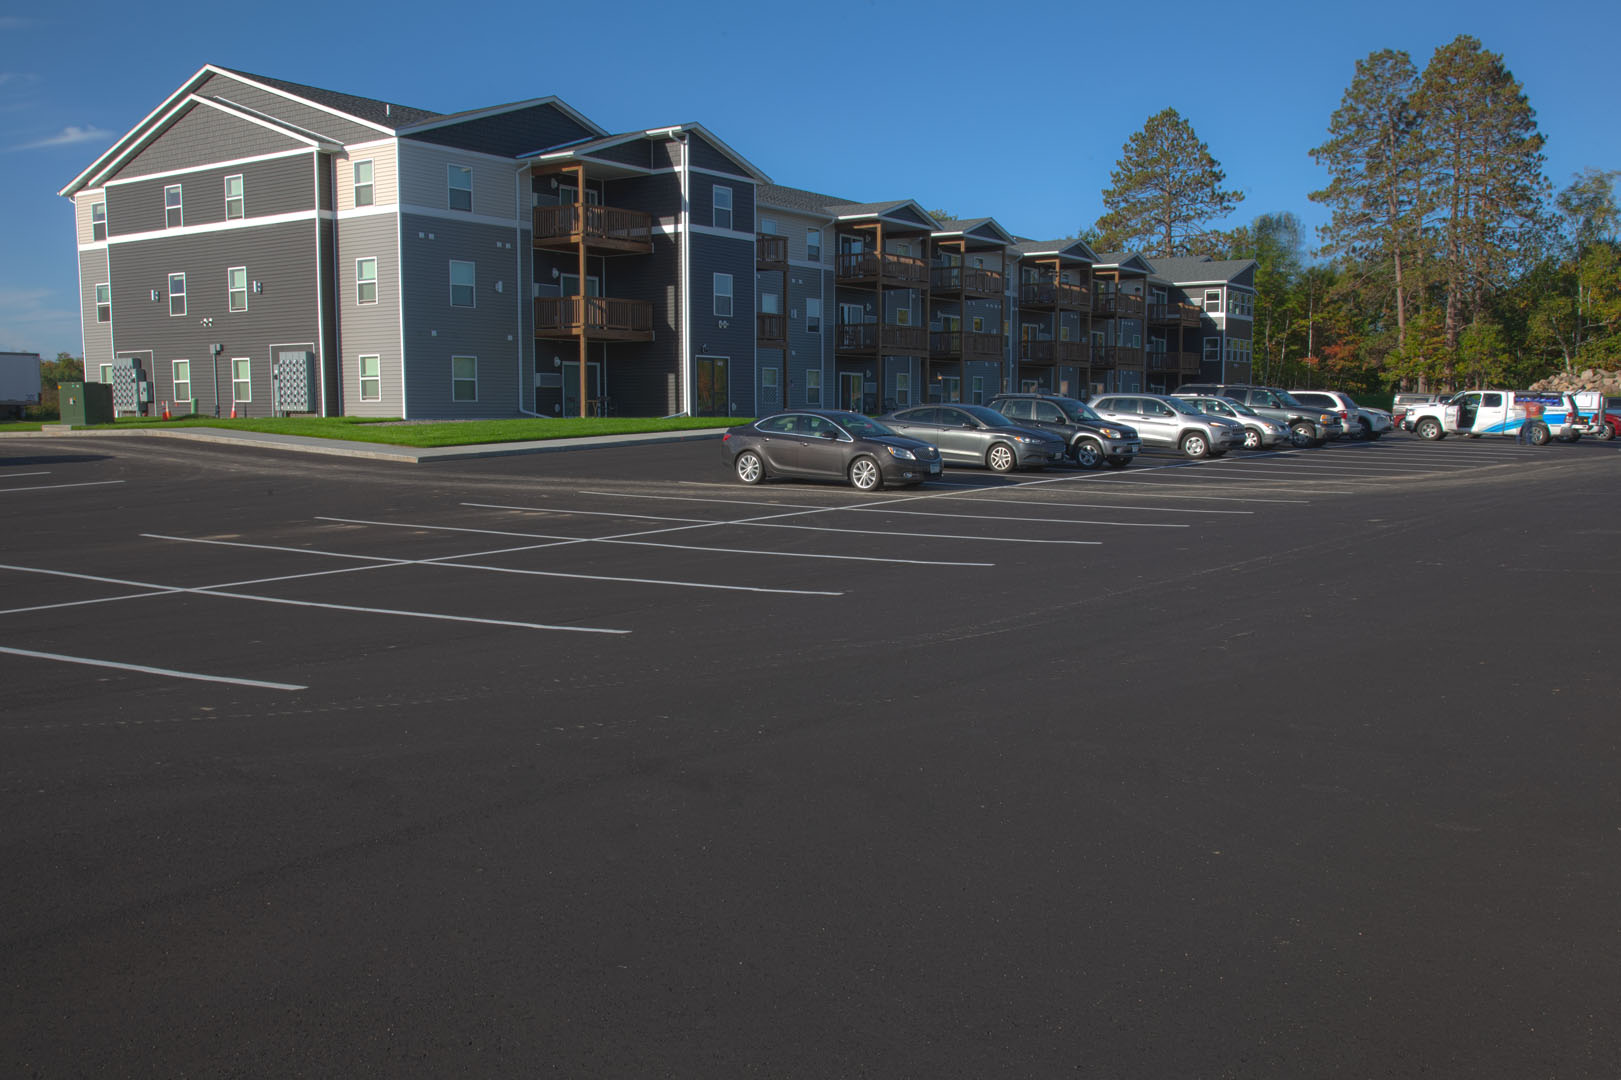 Paved parking lot of local apartment complex